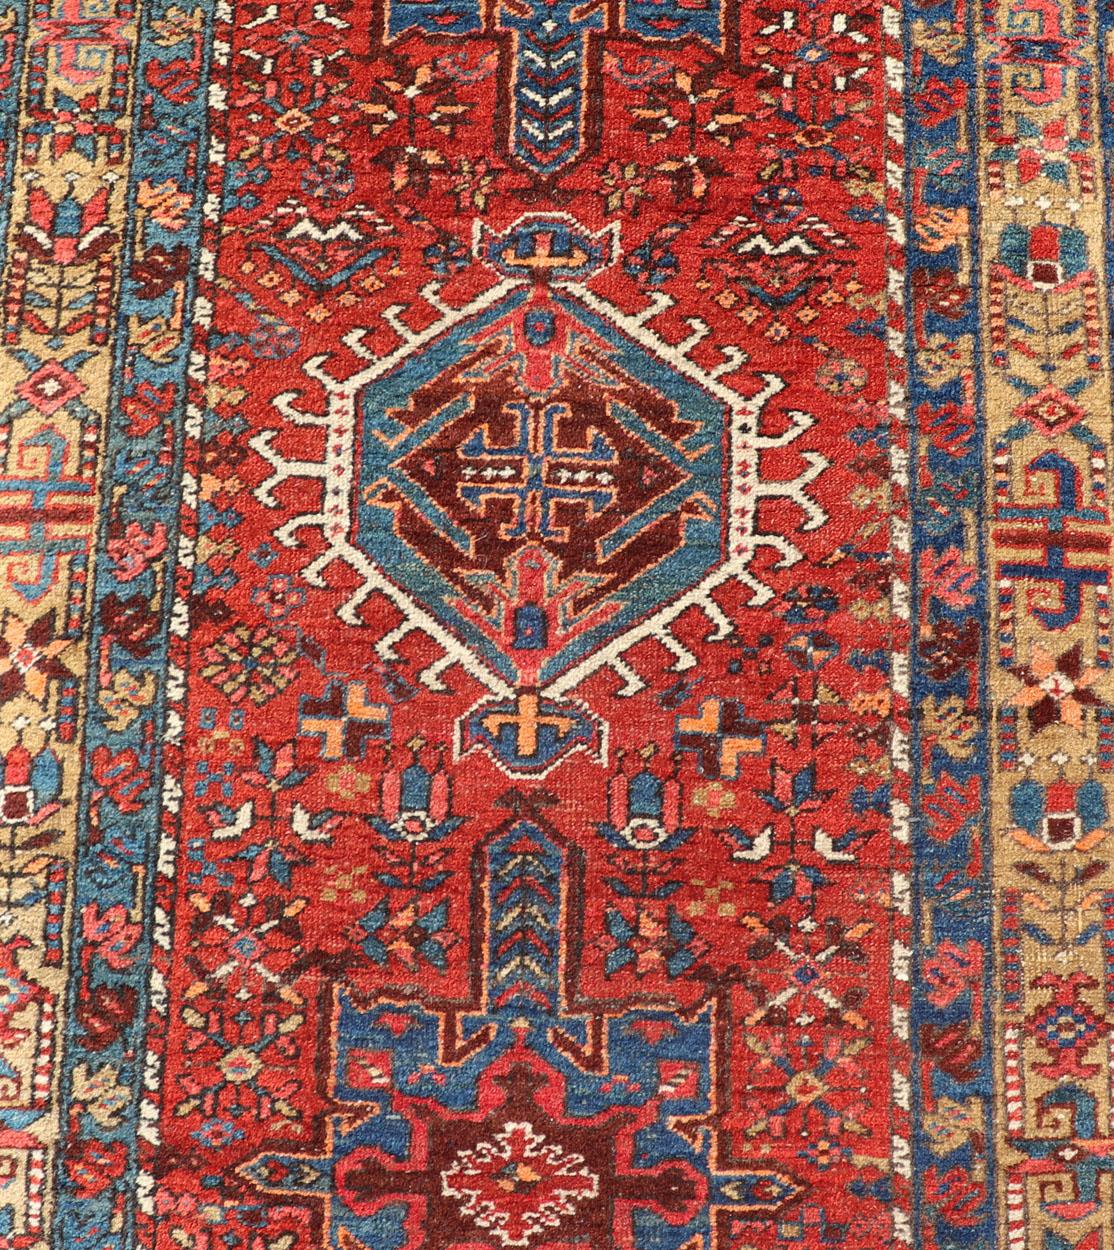 Antique Geometric Persian Long Heriz Runner in Red, Blue, Yellow, Teal, Orange For Sale 2